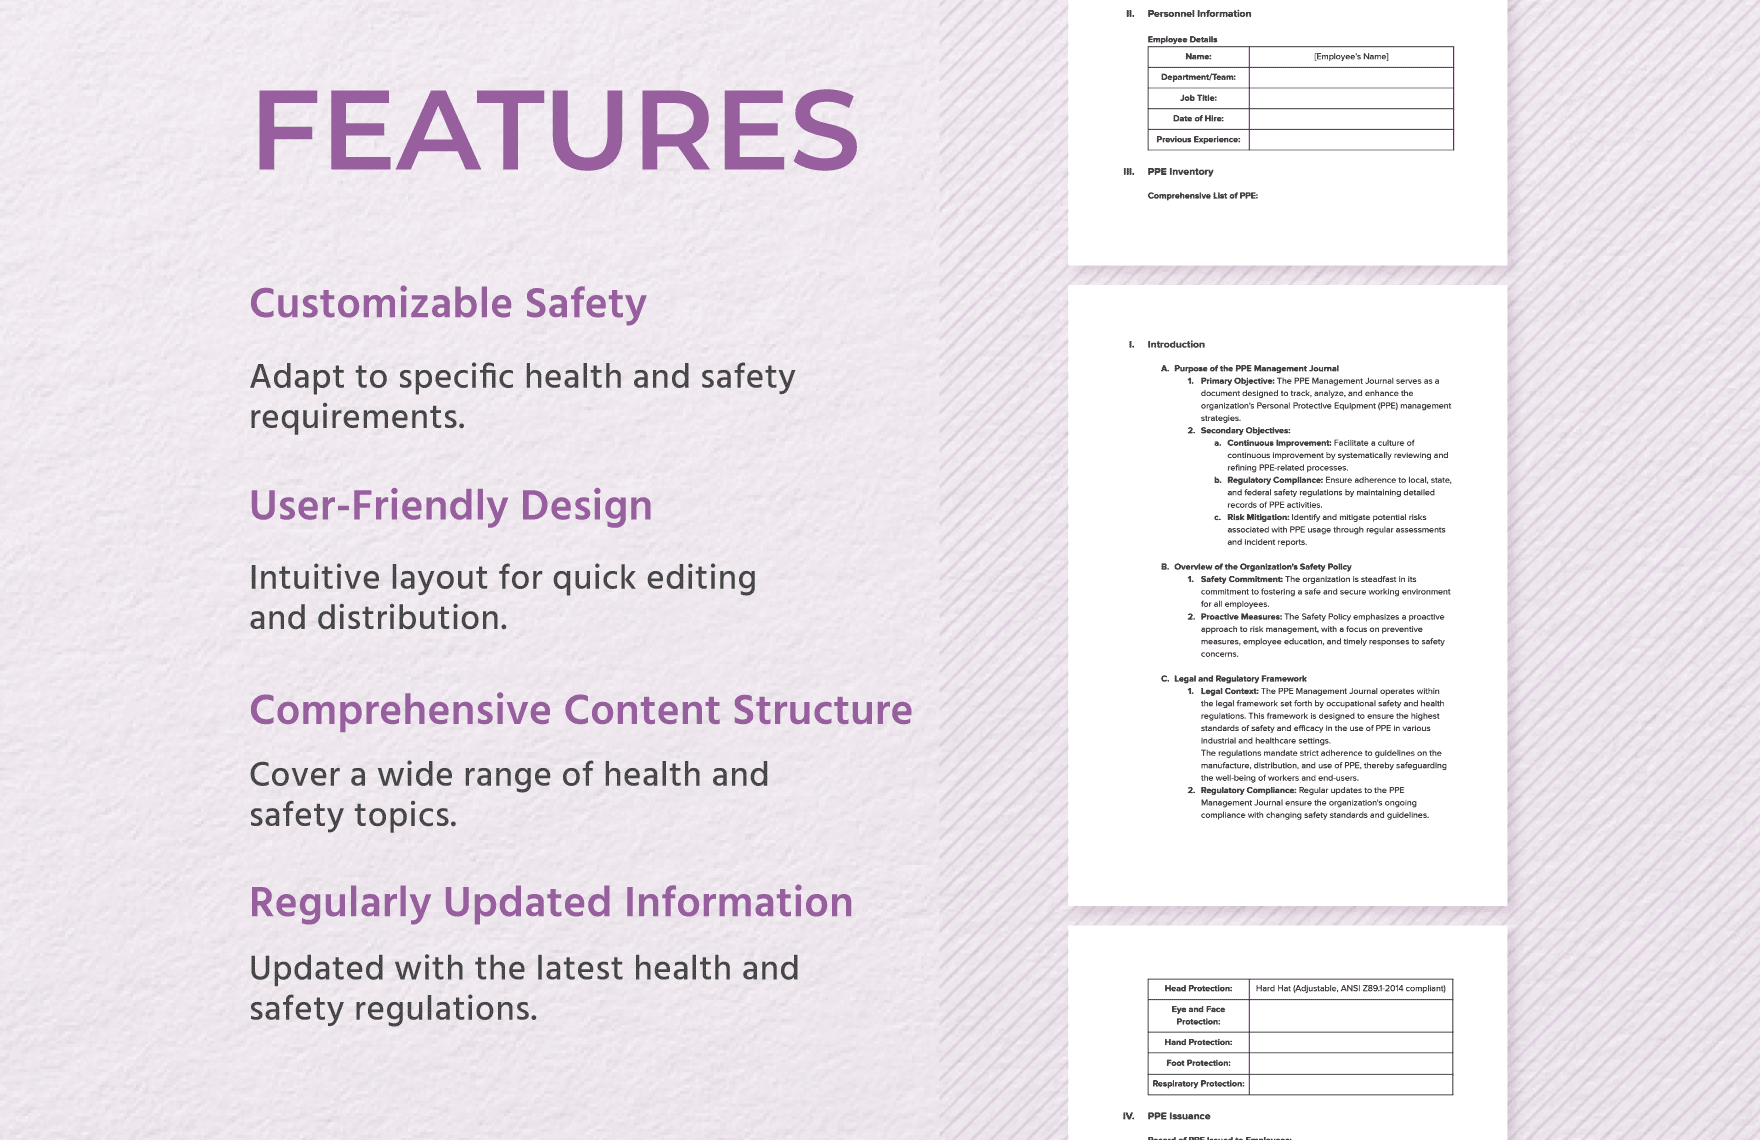 PPE Management Journal Template